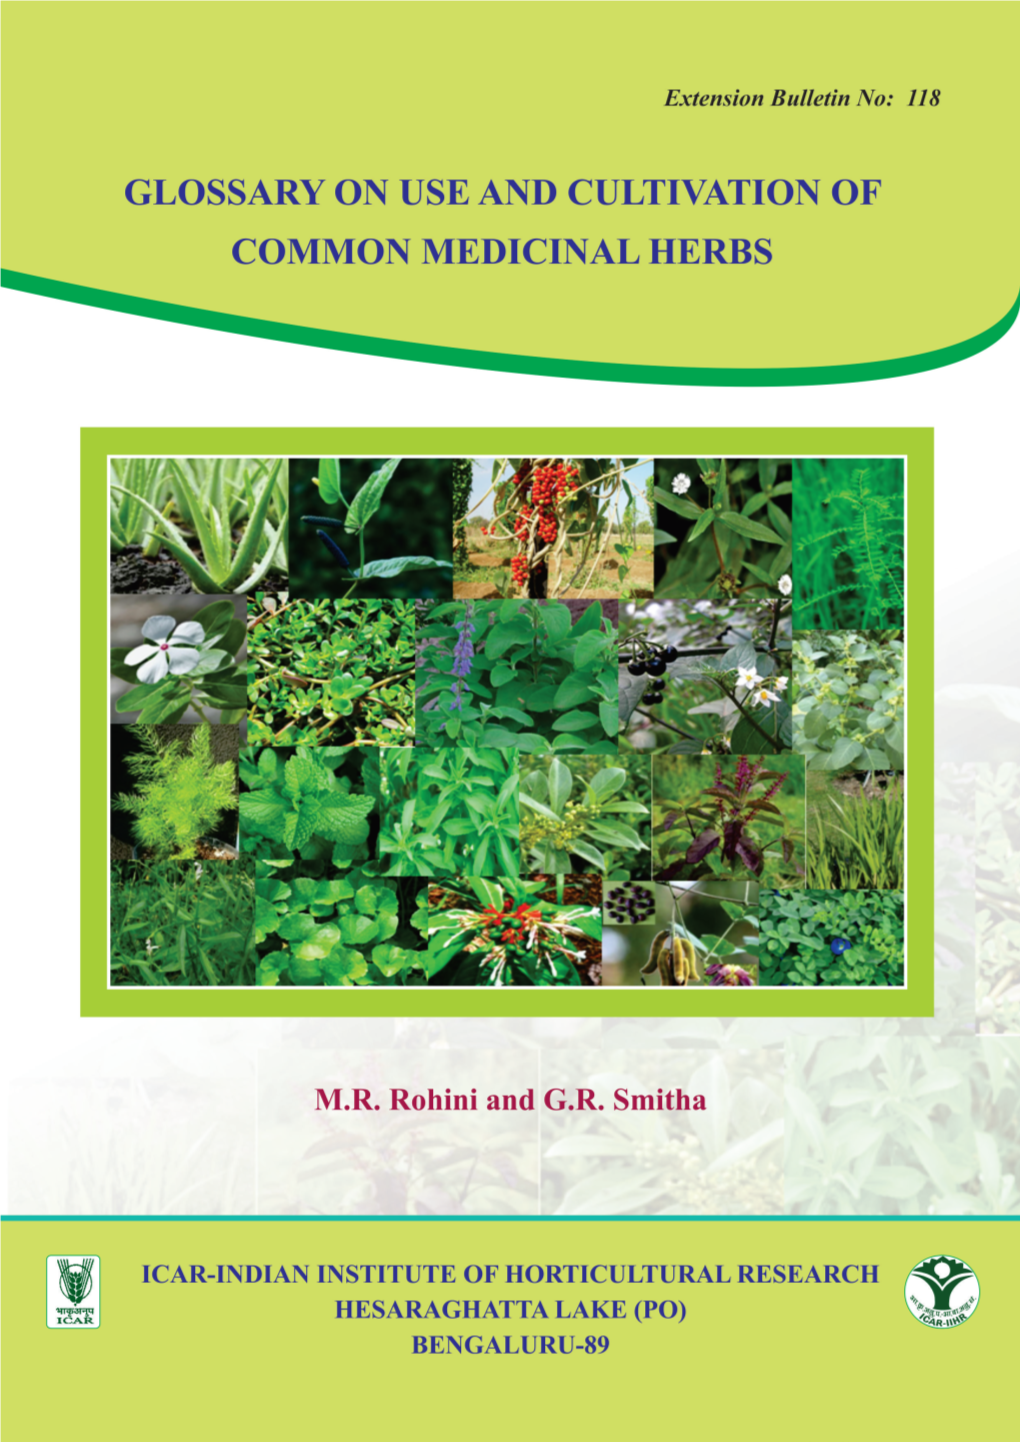 Glossary on Use and Cultivation of Common Medicinal Herbs'- (Extn Folder No. 118)